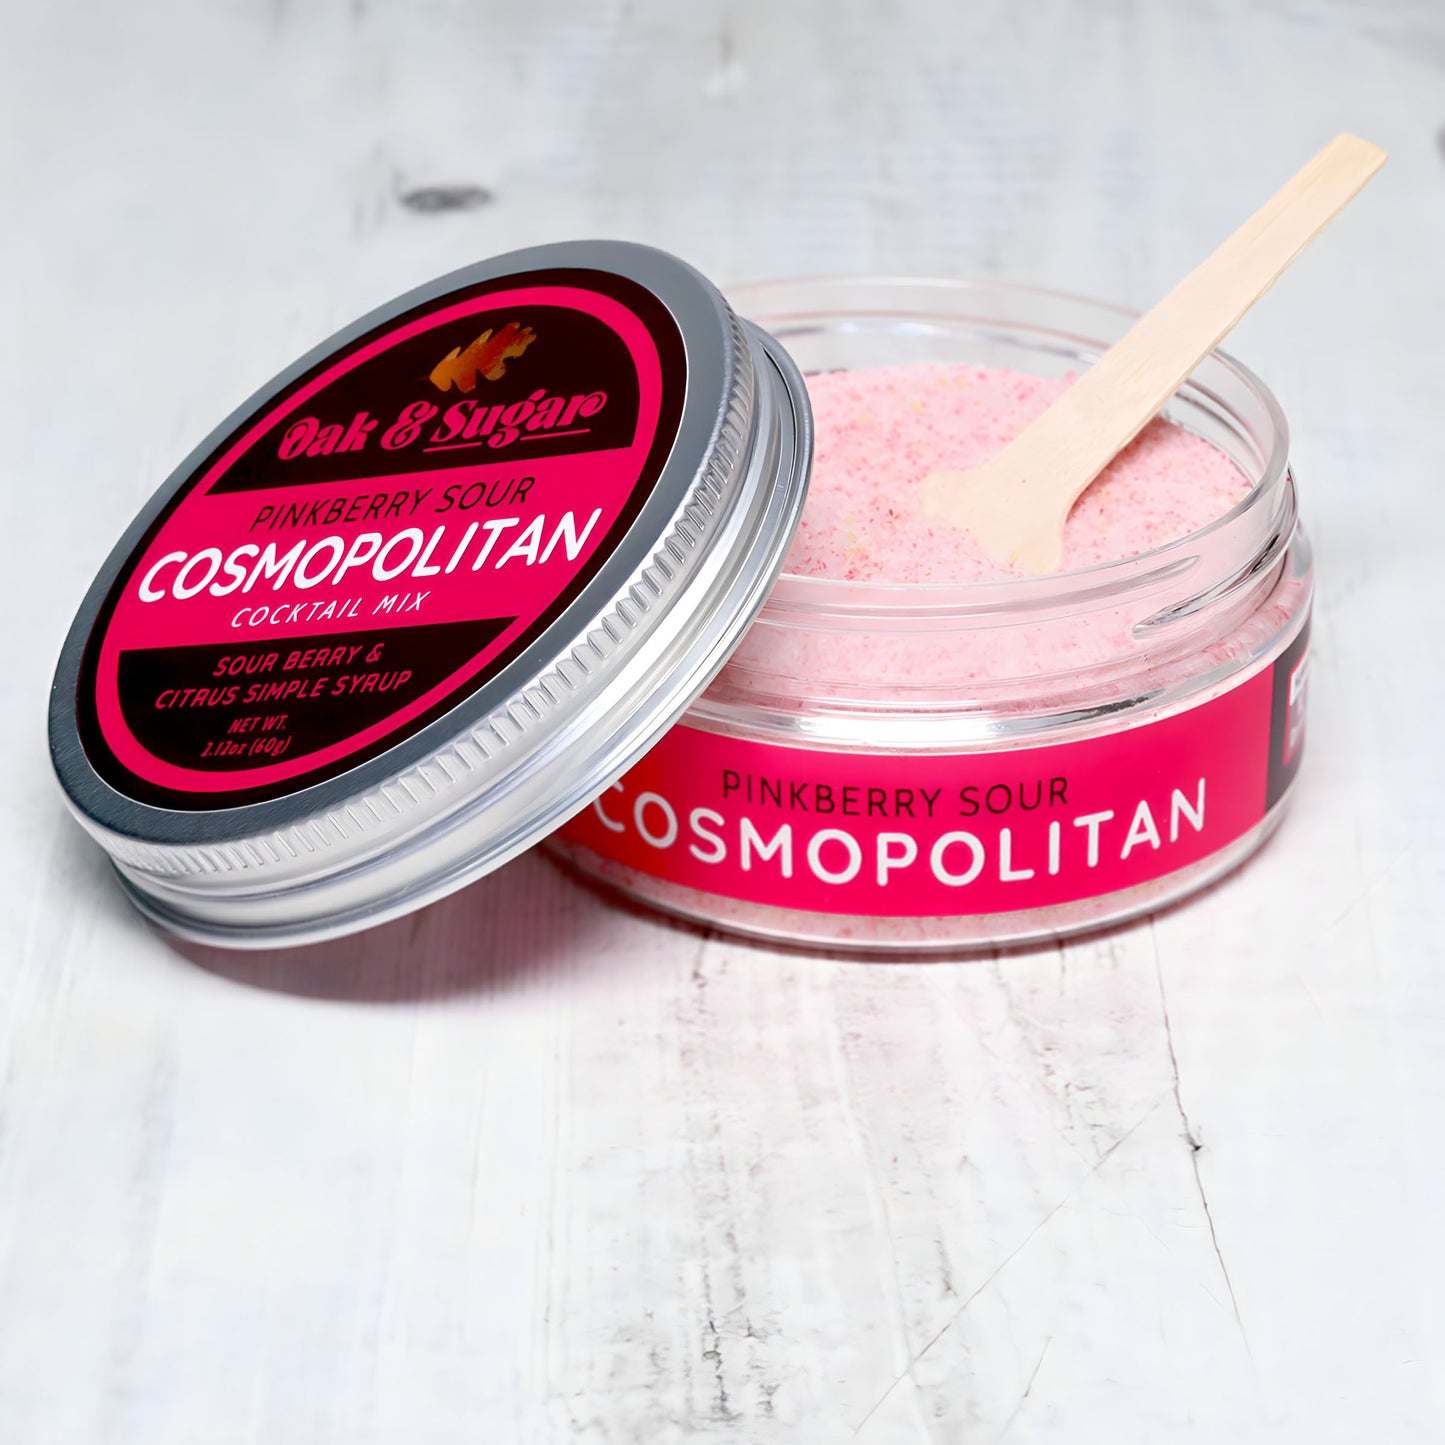 A glass jar of Oak & Sugar Pinkberry Sour Cosmopolitan Cocktail Mix is displayed on a light-colored surface. The jar is open, revealing pink powder inside, with a small wooden scoop resting on the edge. The label is red with white and pink text, reminiscent of a chic *Sex and the City* vodka cocktail moment.